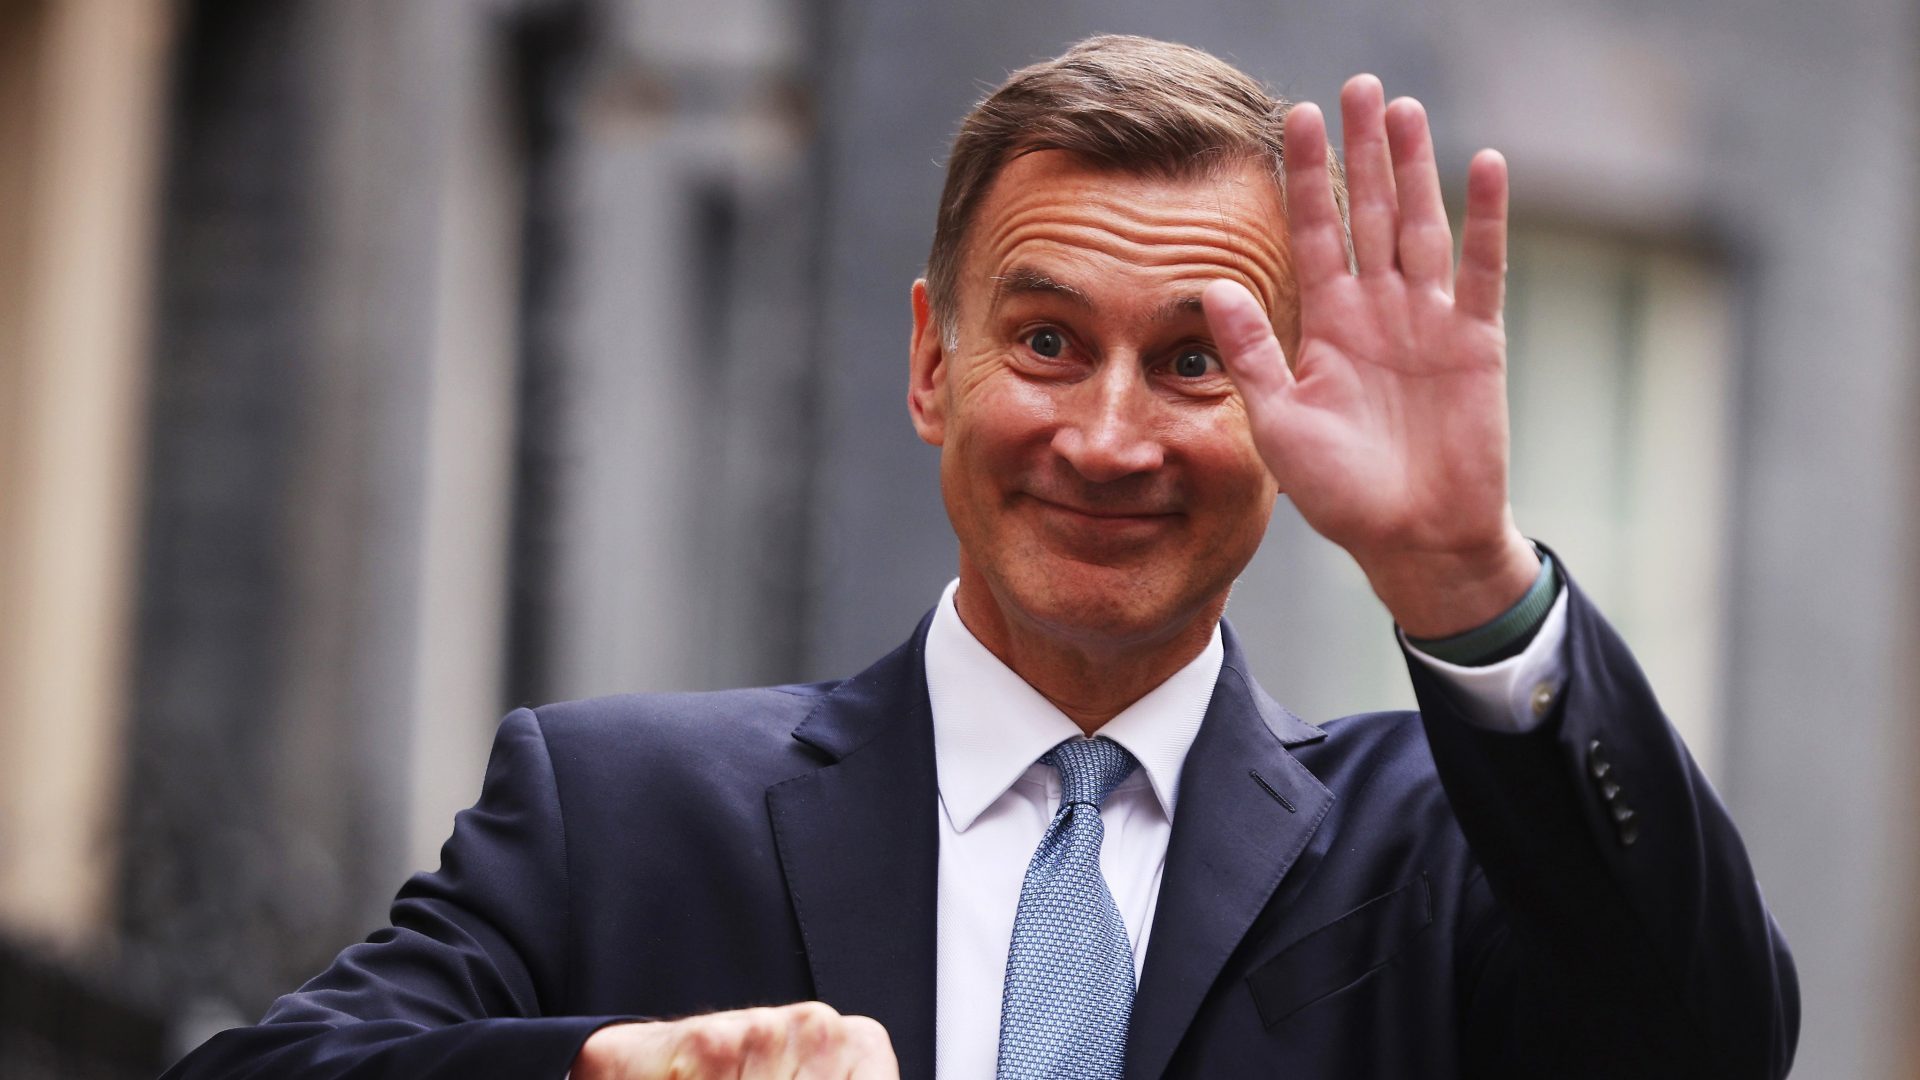 Jeremy Hunt leaves Downing Street. Photo: Dan Kitwood/Getty Images